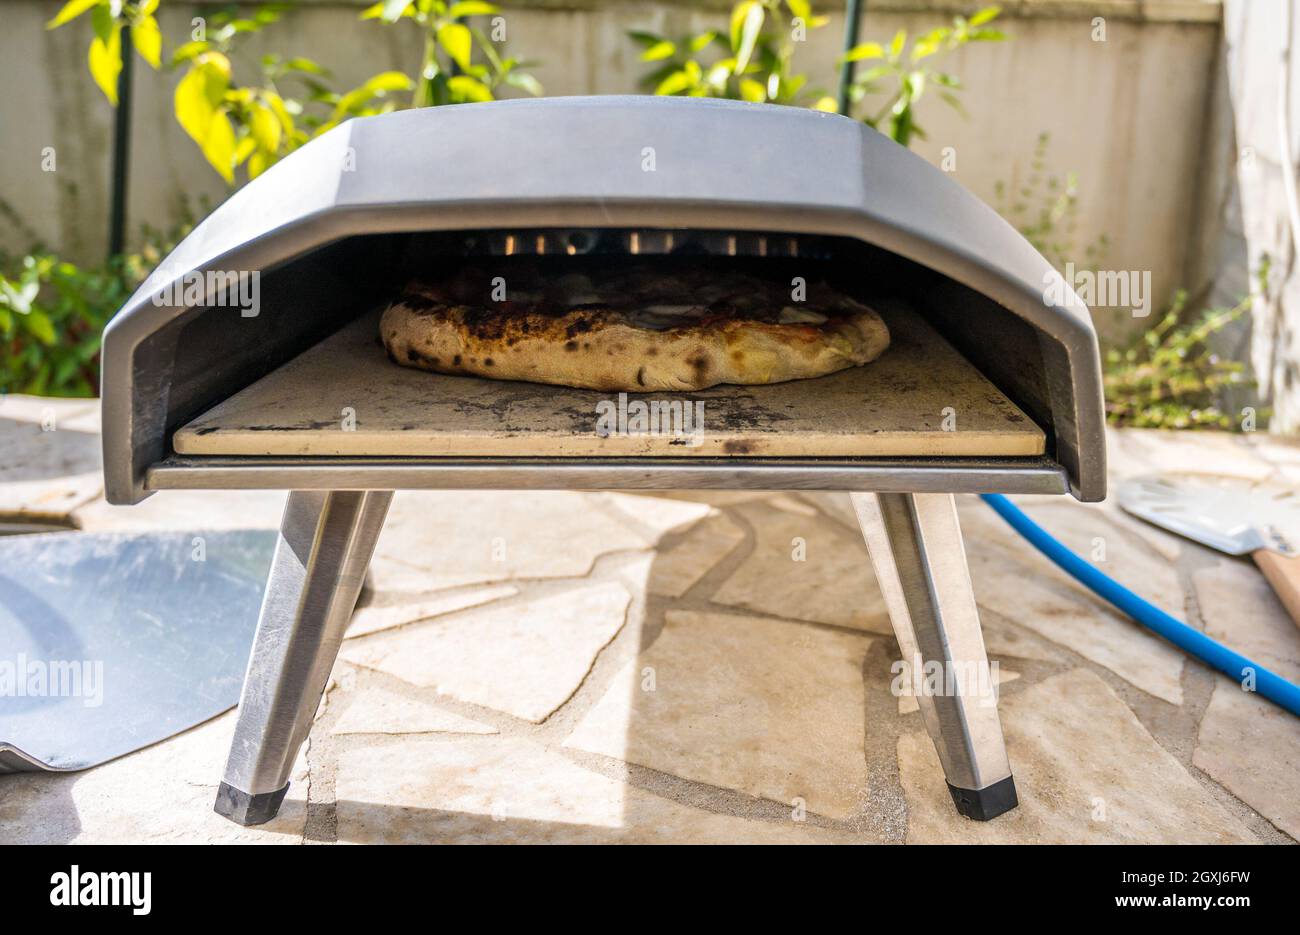 Making homemade pizza in portable high temperature gas pizza oven.  Delicious pizza is baking in gas oven furnace for home made Neapolitan  pizza. Speci Stock Photo - Alamy